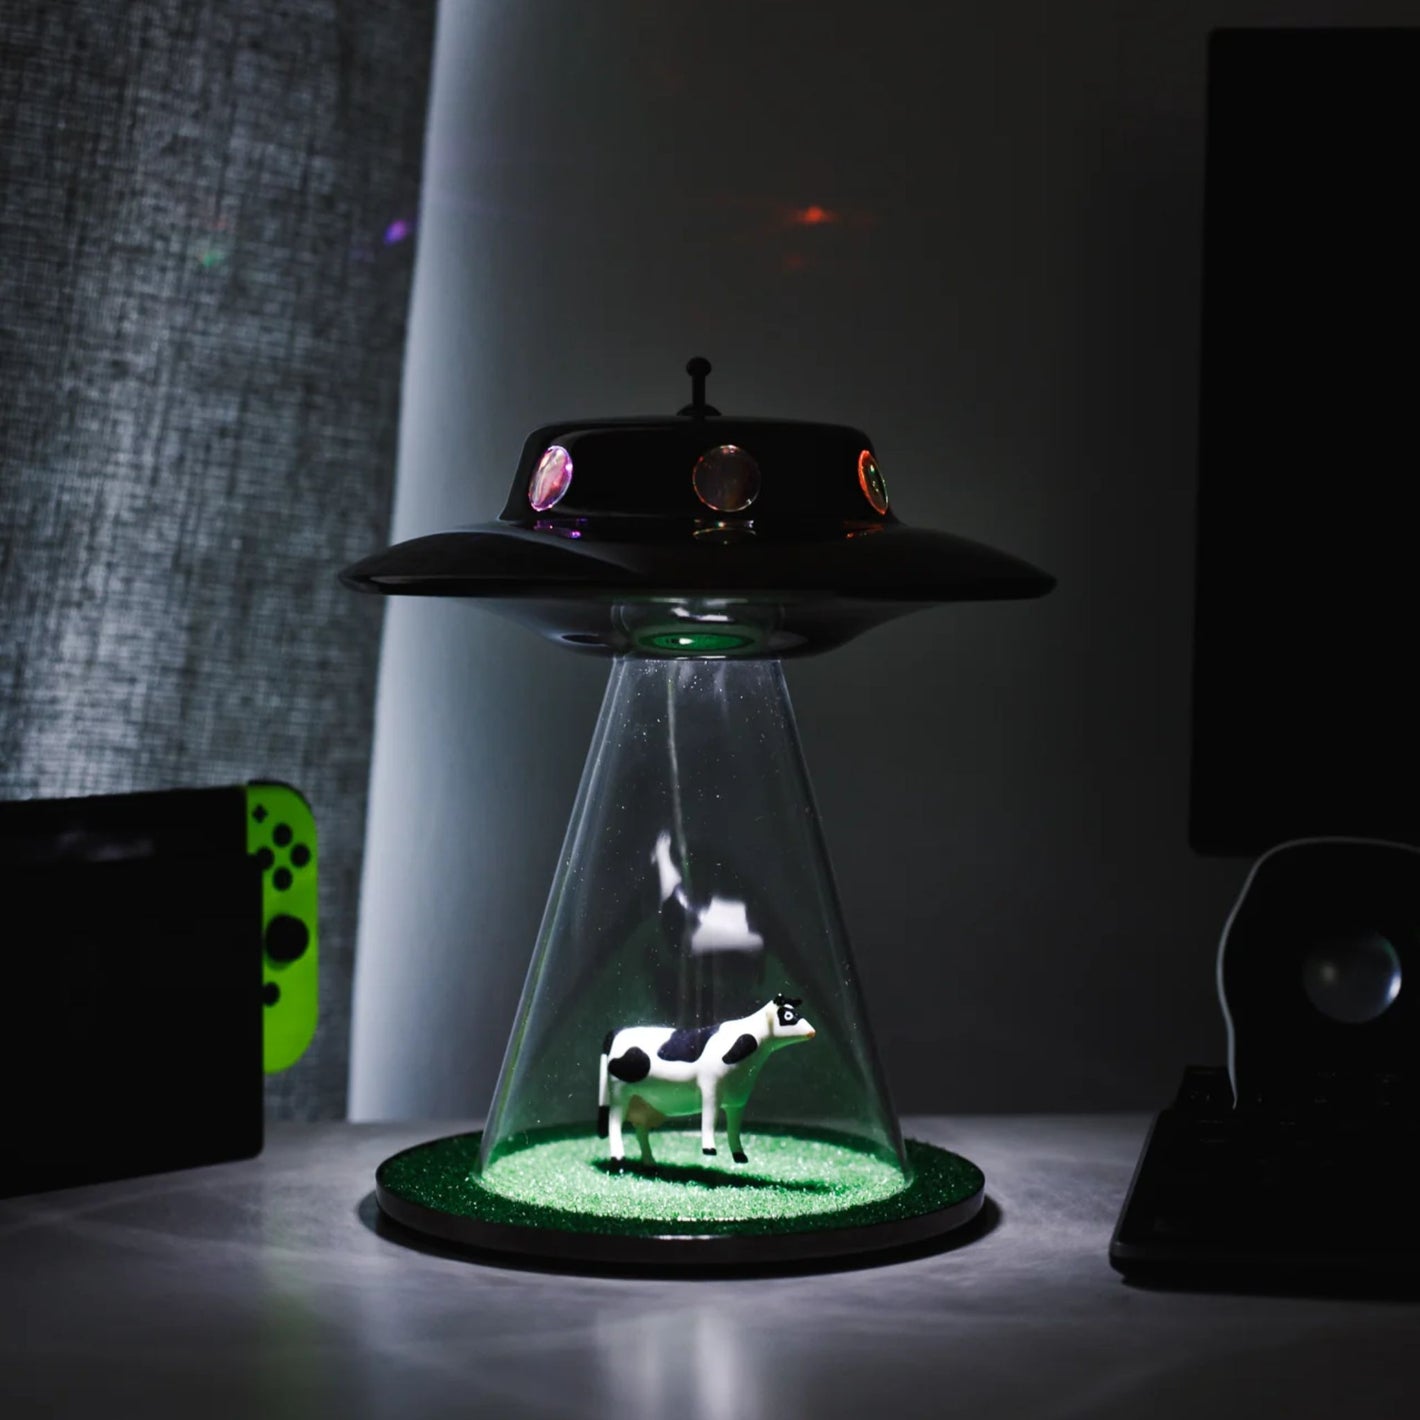 review 1 - Original UFO Cow Lamp & amazon alien abduction table desk lamp with grass, cow and flying UFO saucer LED RGB night light